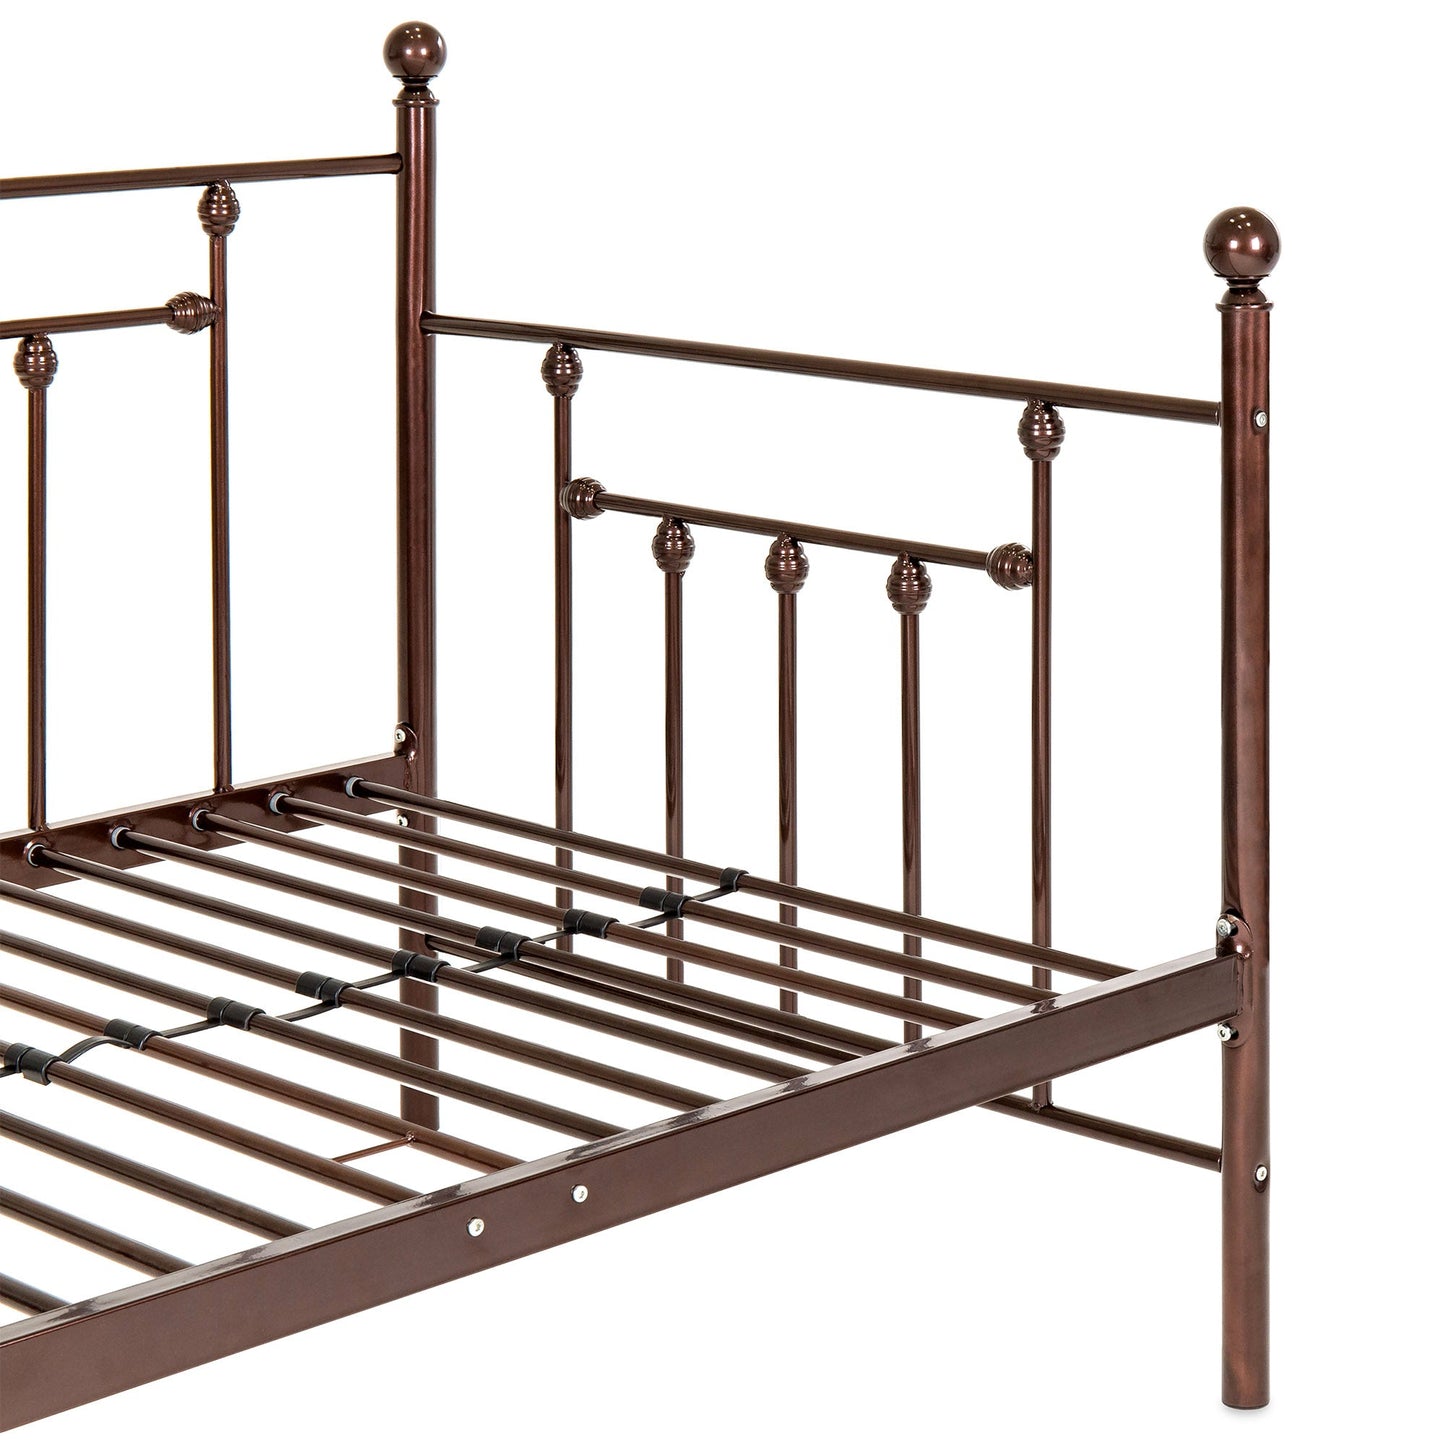 Twin Sized Metal Lounge Daybed Frame w/ Trundle, Finials